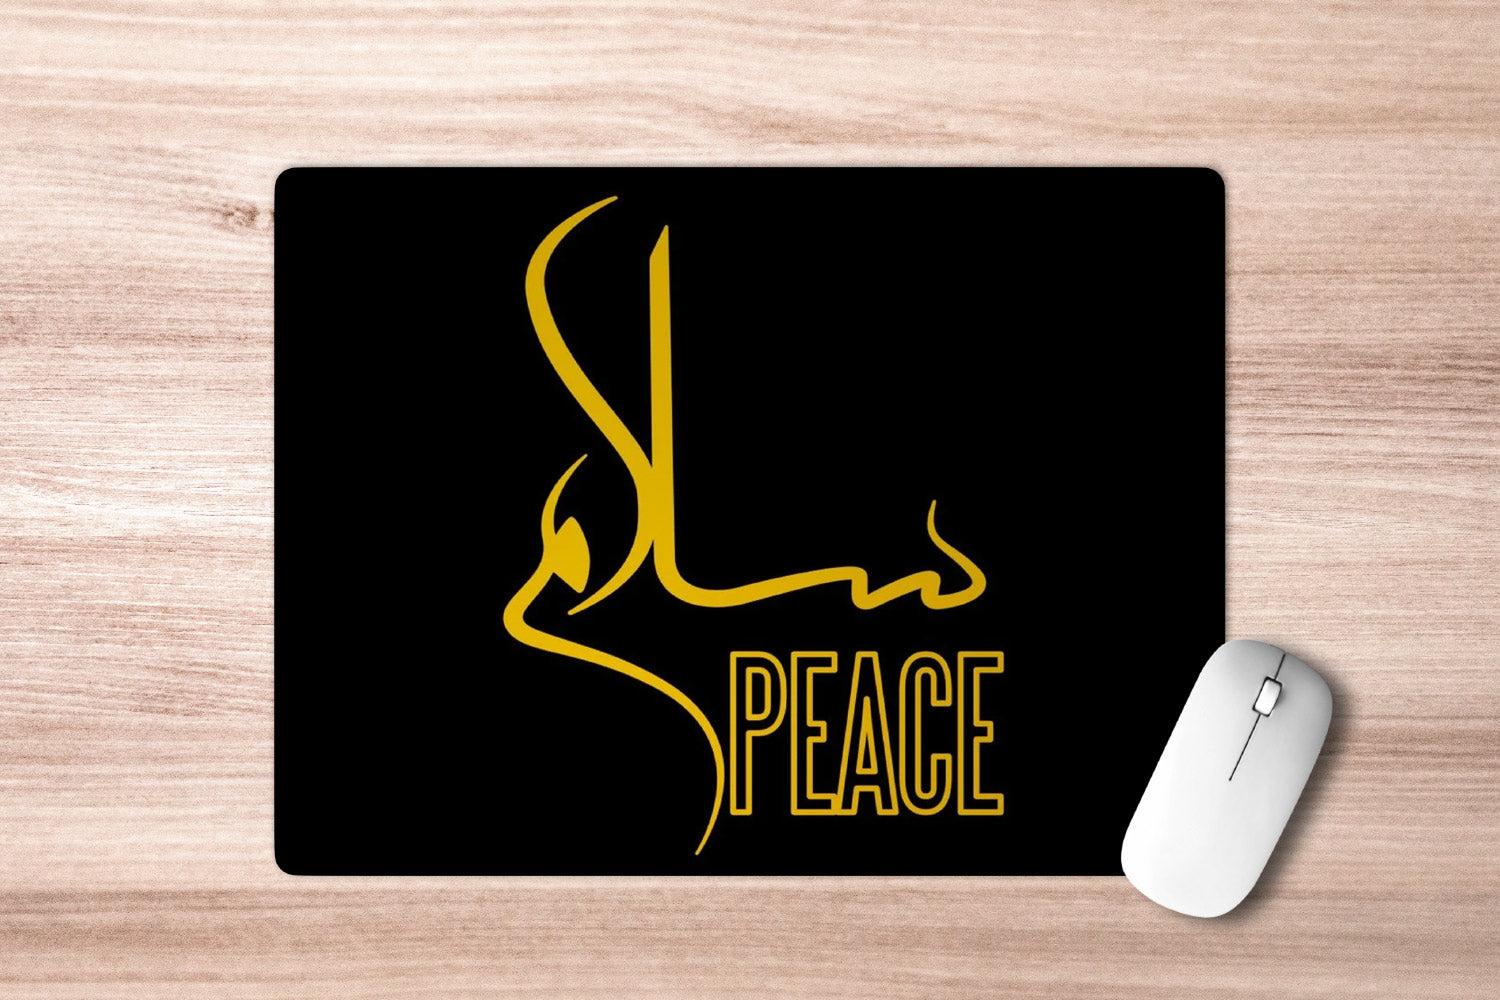 Peace' Printed Non-Slip Rubber Base Mouse Pad for Laptop, PC, Computer.